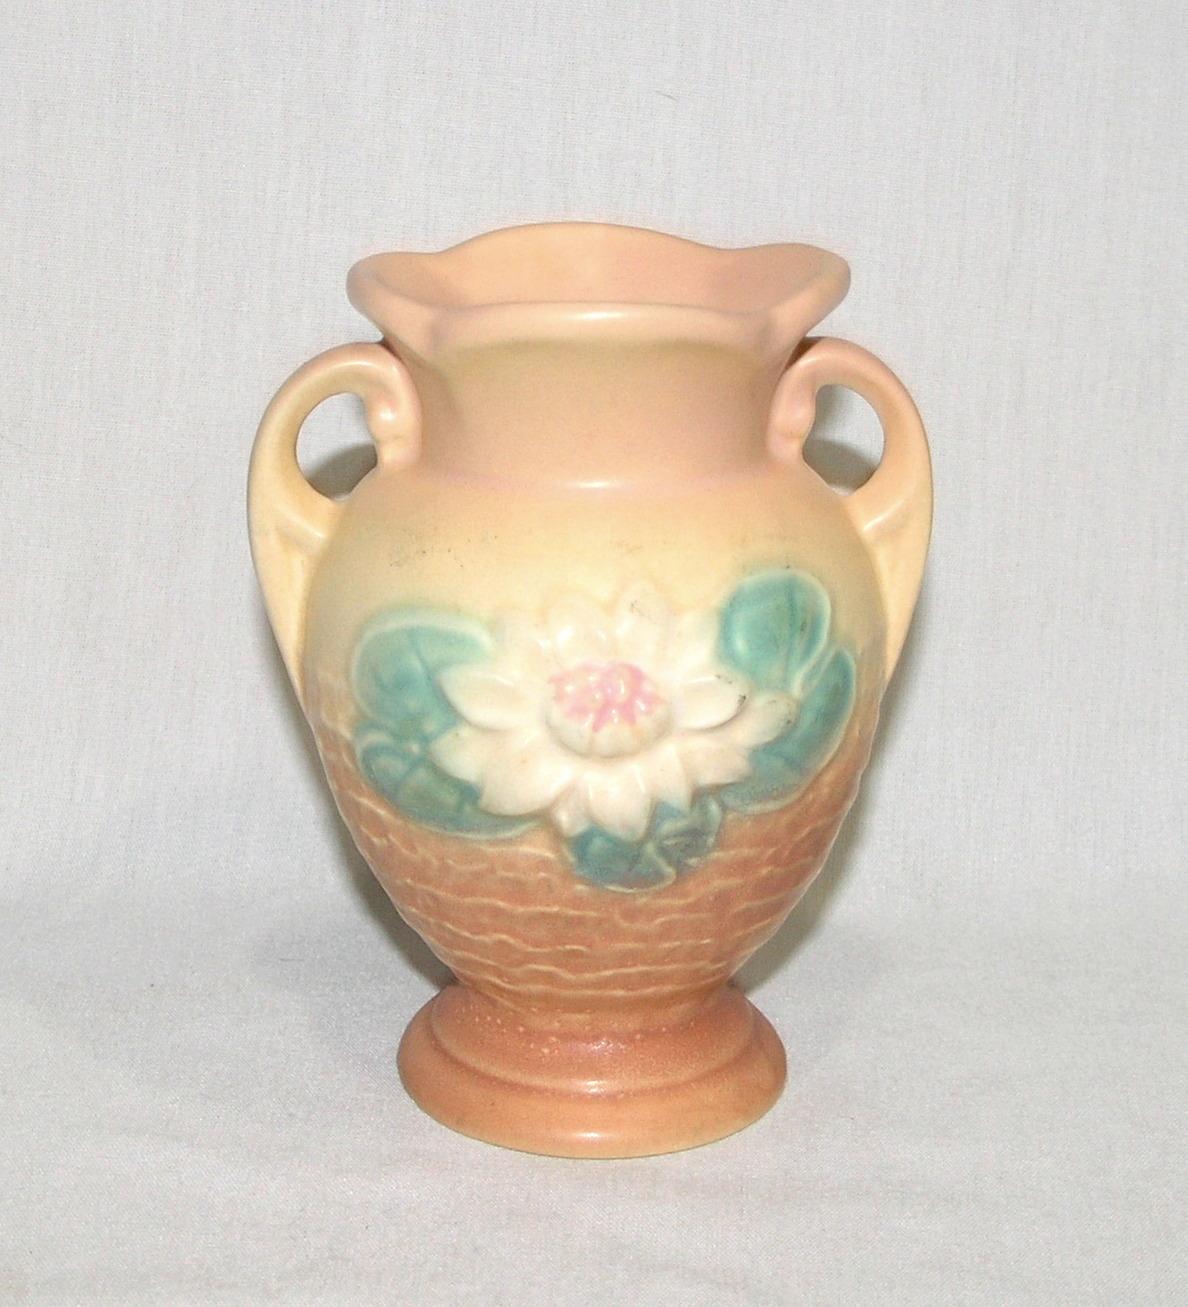 Vintage Hull Art Pottery Water Lilly Vase L-1 - 5-1/2. No Chips or Cracks